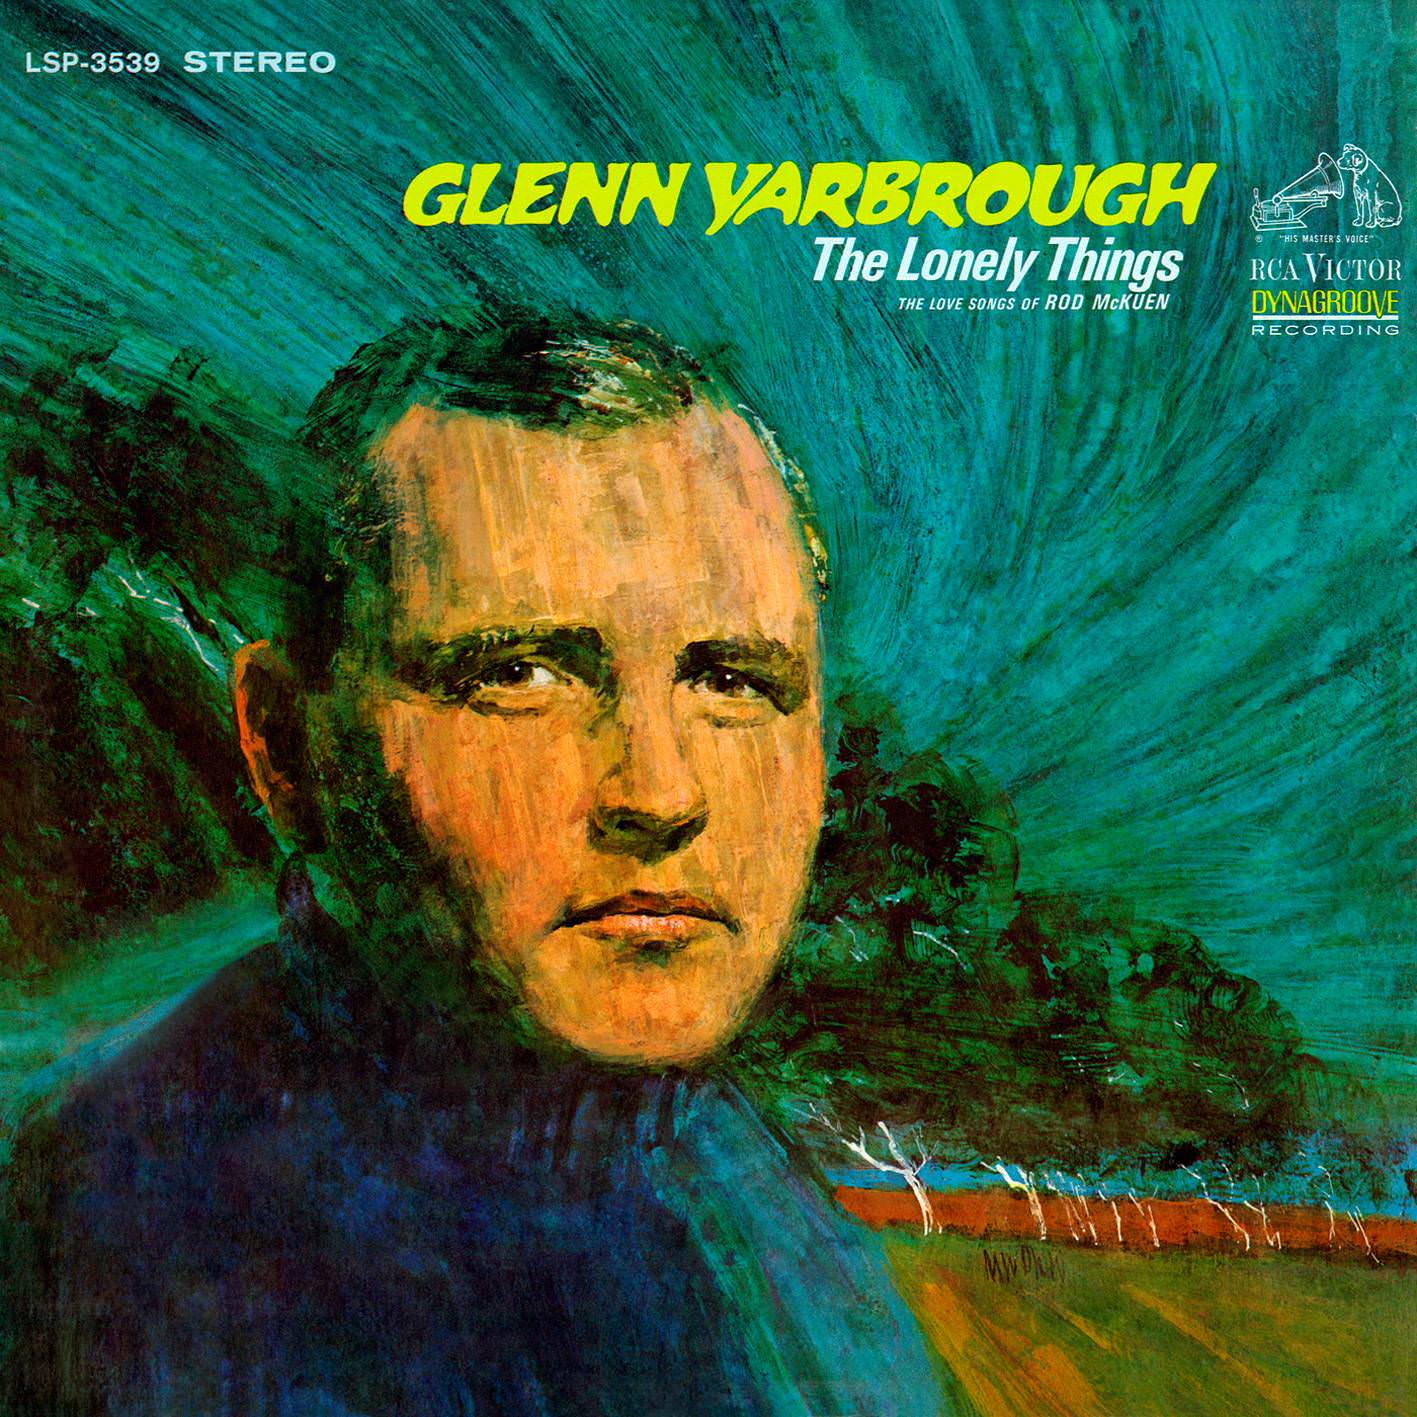 Glenn Yarbrough - The Lonely Things (1966/2017) [AcousticSounds FLAC 24bit/192kHz]